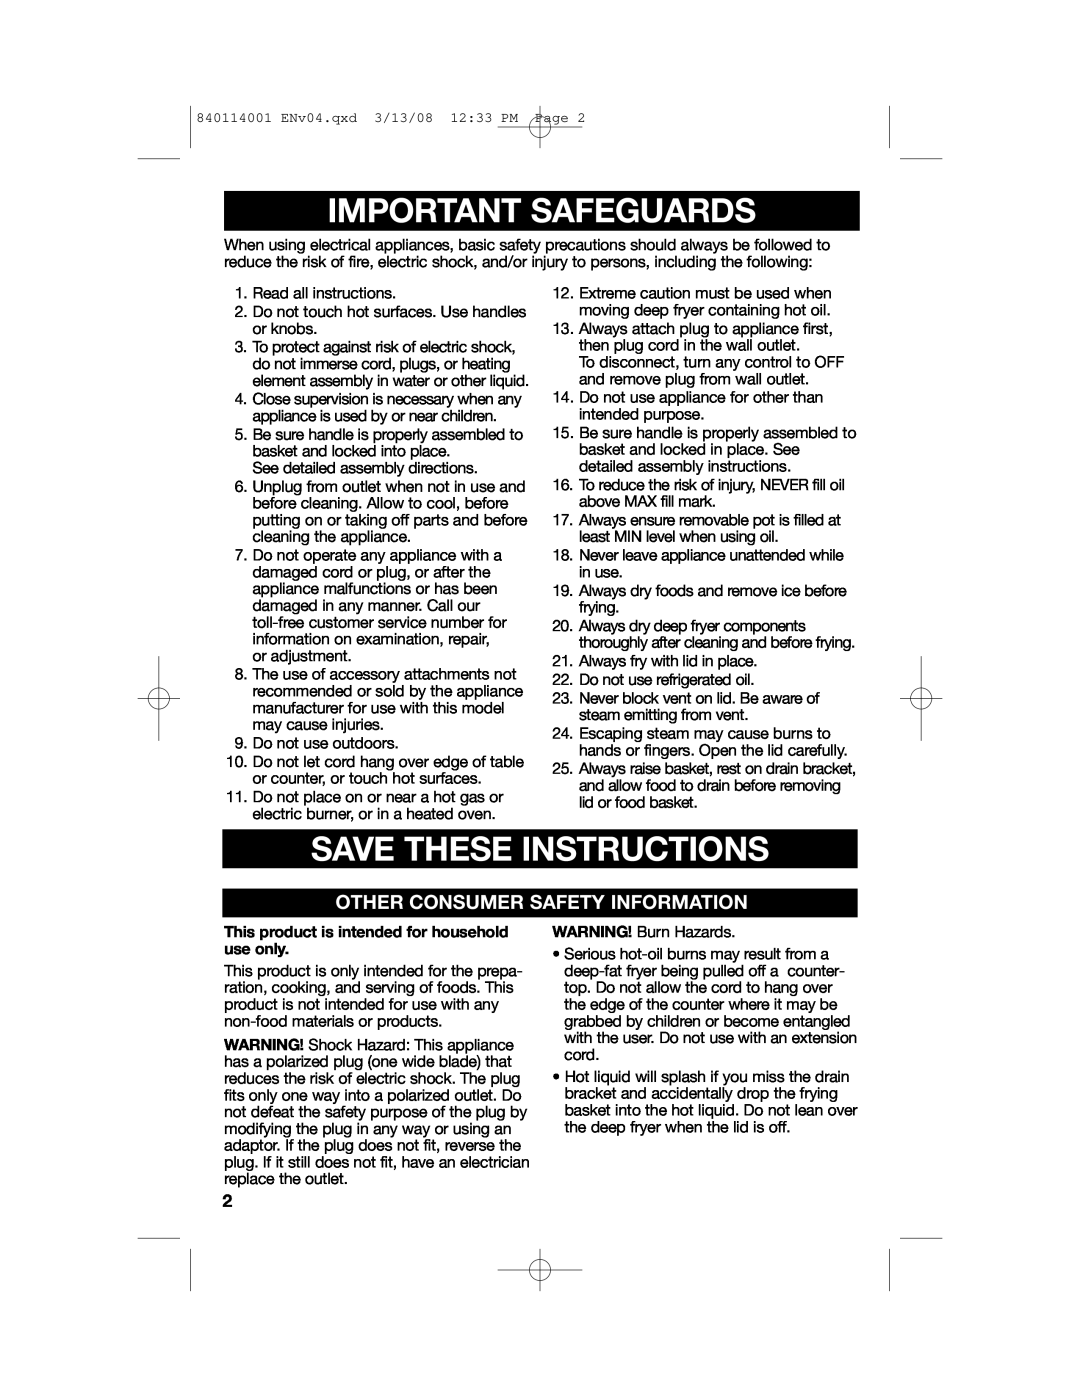 Hamilton Beach 840114001 manual Important Safeguards, Save These Instructions, Other Consumer Safety Information 